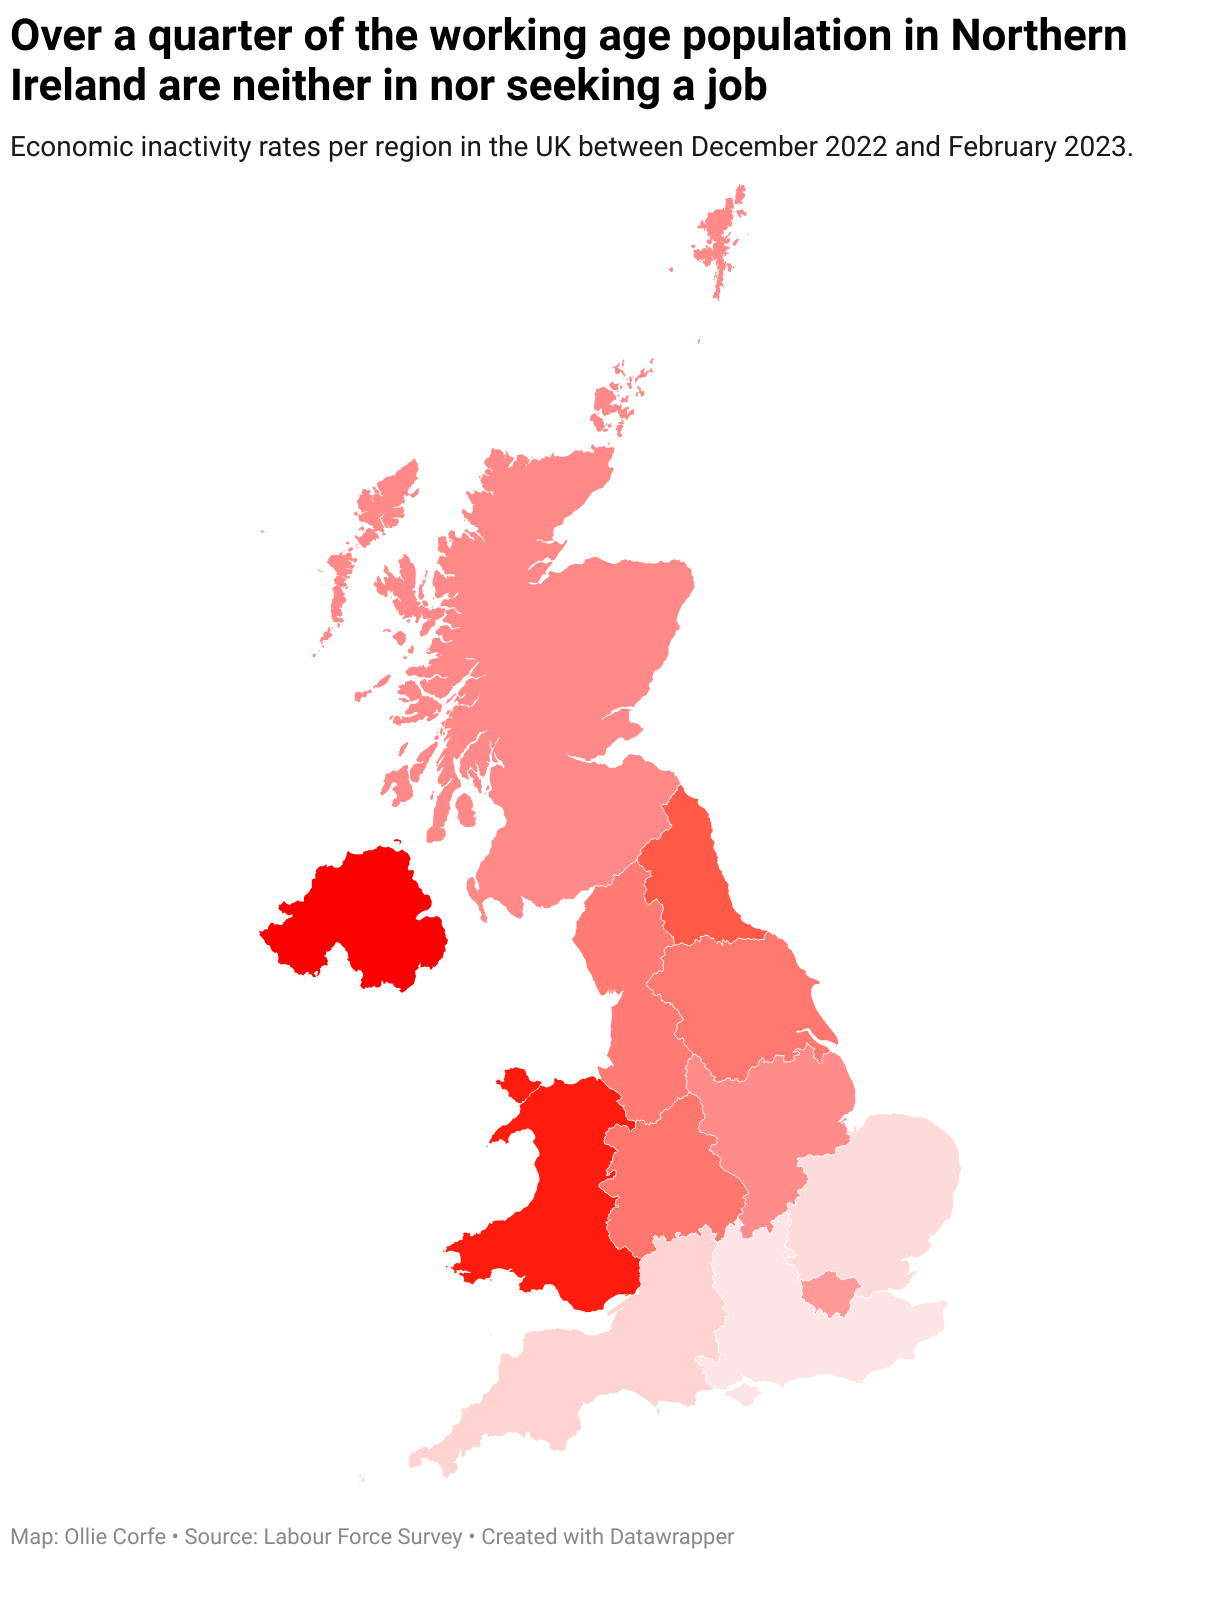 Map of UK regions by economic inactivity rates.